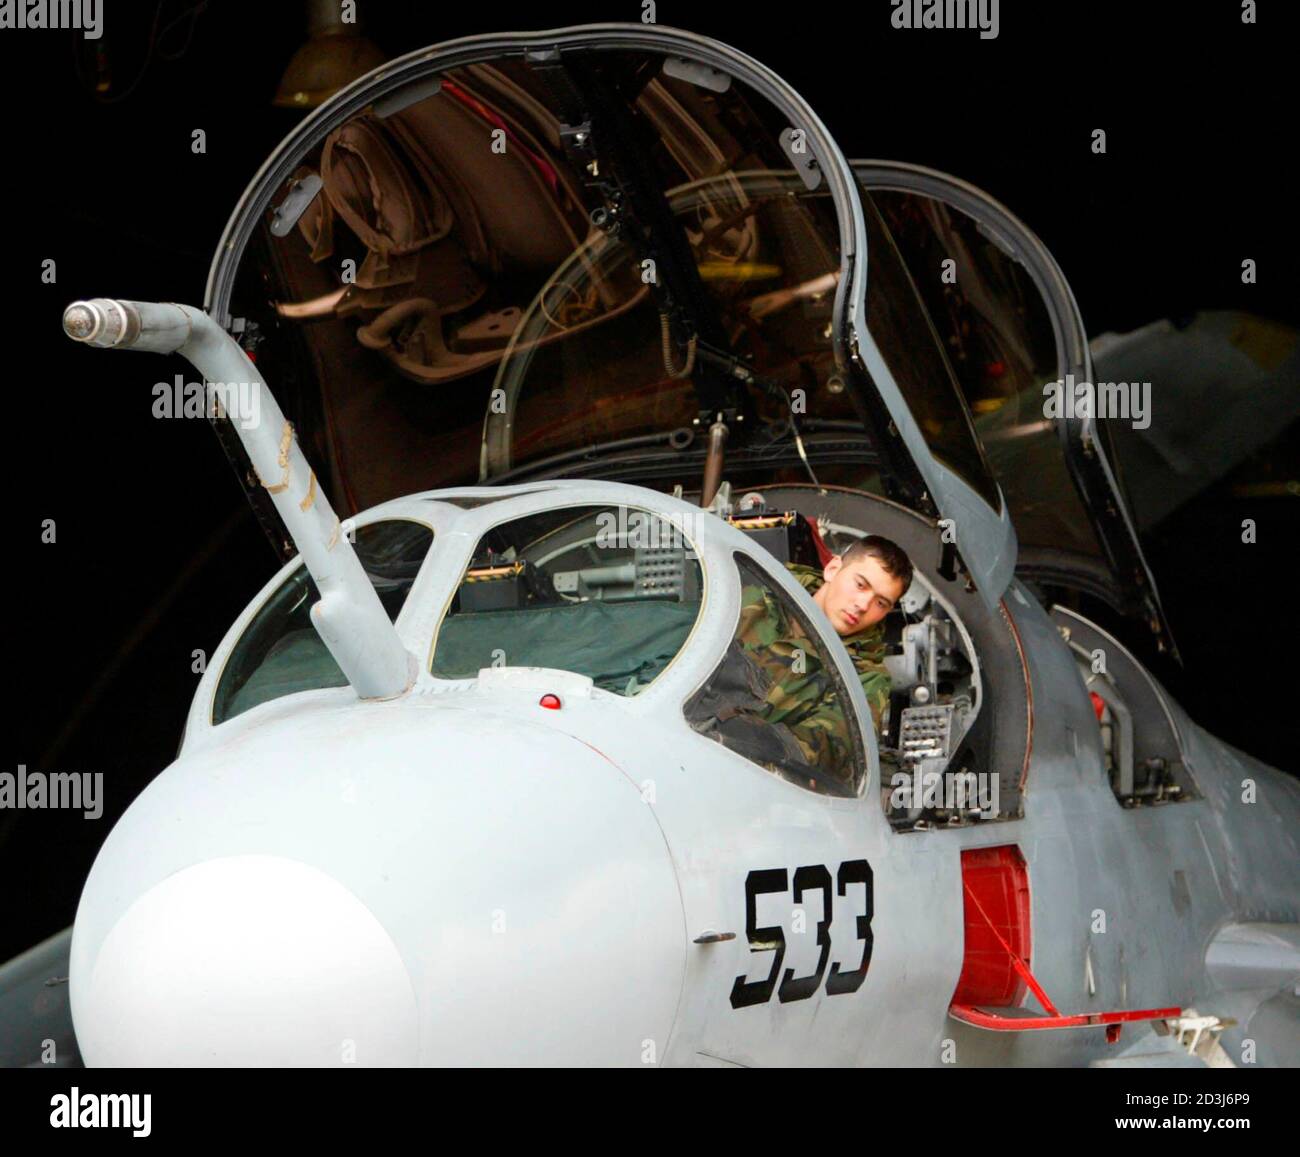 A U.S. airman checks an EA-6B Prowler radar jamming plane, used to provide an umbrella of protection over strike aircraft, during a routine check at Turkish base of Incirlik near the southern Turkish city of Adana. Christmas will be a working holiday for U.S. pilots stationed at Incirlik air base as a possible war against nearby Iraq looms on the horizon. Fighter jets from Incirlik in southern Turkey have cruised the skies above northern Iraq since a no-fly zone was imposed there after the 1991 Gulf War. Picture was taken on December 19, 2002. TO ACCOMPANY BC-IRAQ-USA-PILOTS, GENERAL FEATURE.  Stock Photo